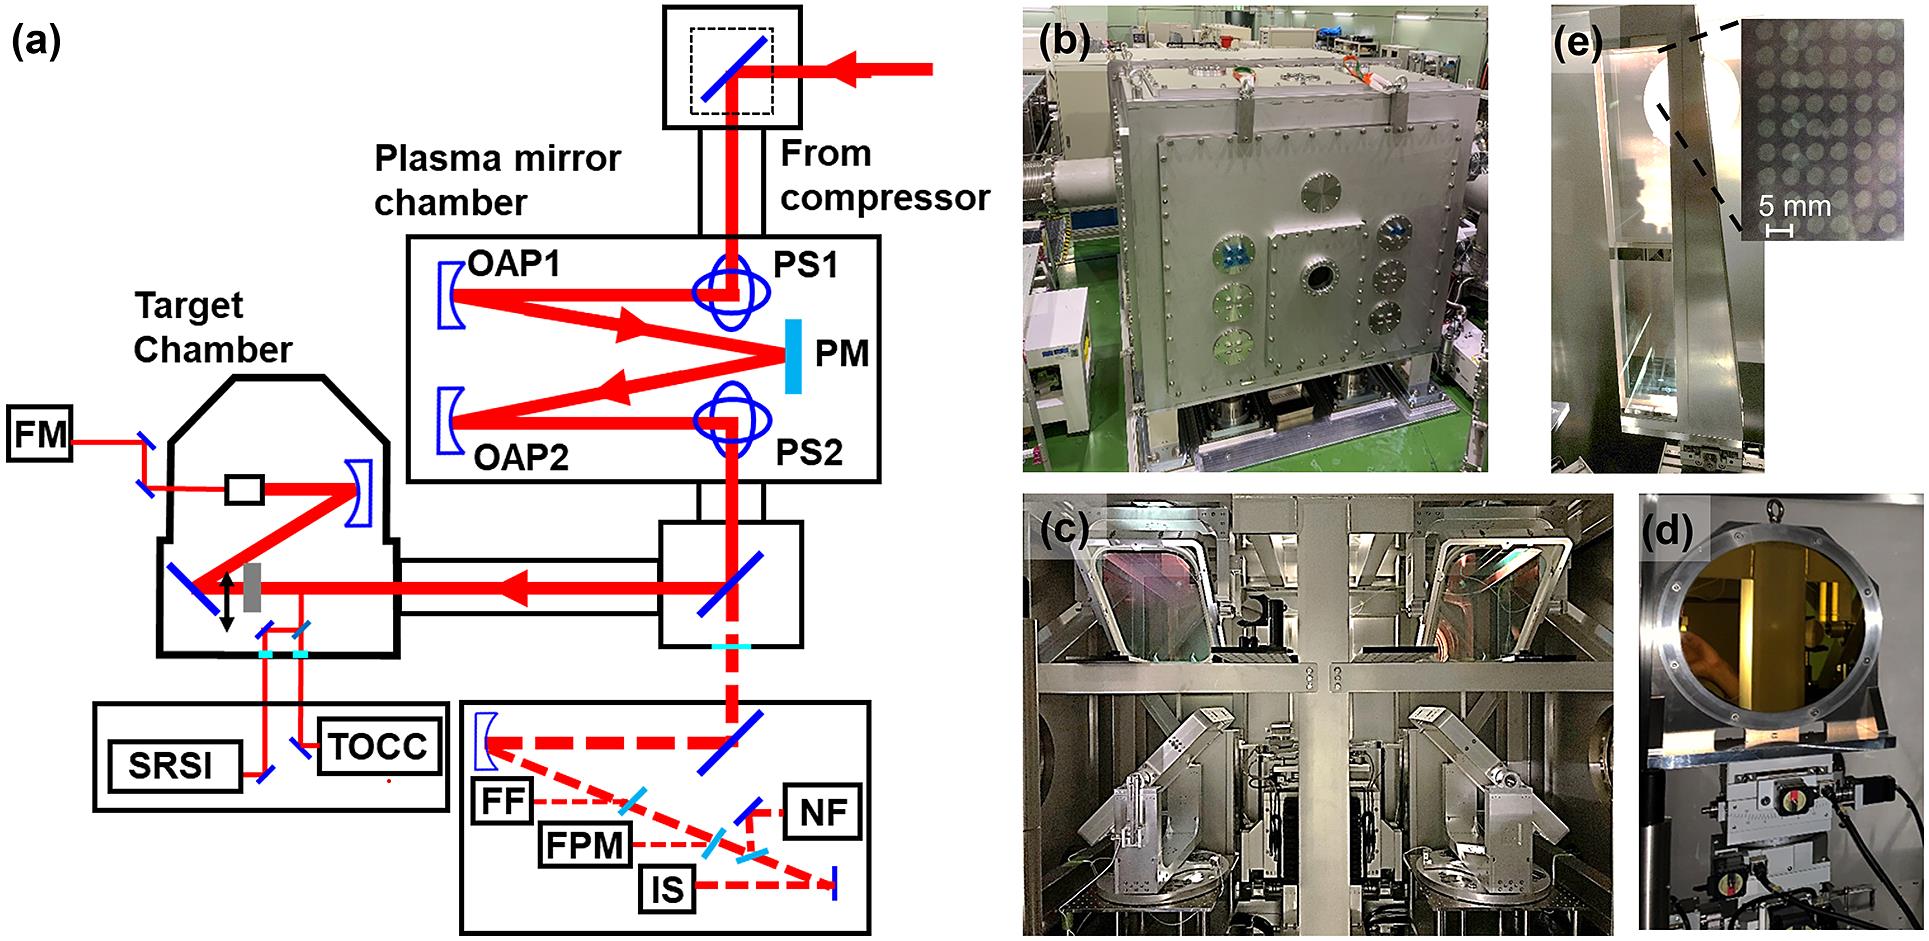 Layout and picture of the plasma mirror system at J-KAREN-P. (a) Layout of the PM setup. OAP, off-axis parabolic mirrors; PS, periscope; NF, near-field image camera; FF, far-field image camera; FPM, focus monitor on the PM; IS, integrating sphere and spectrometer; TOCC, third-order cross-correlator; SRSI, self-referenced spectral interferometry; FM, focus monitor. (b) PM chamber. (c) Periscope pair. (d) OAP and stage. (e) Substrate of single PM and damage pattern.